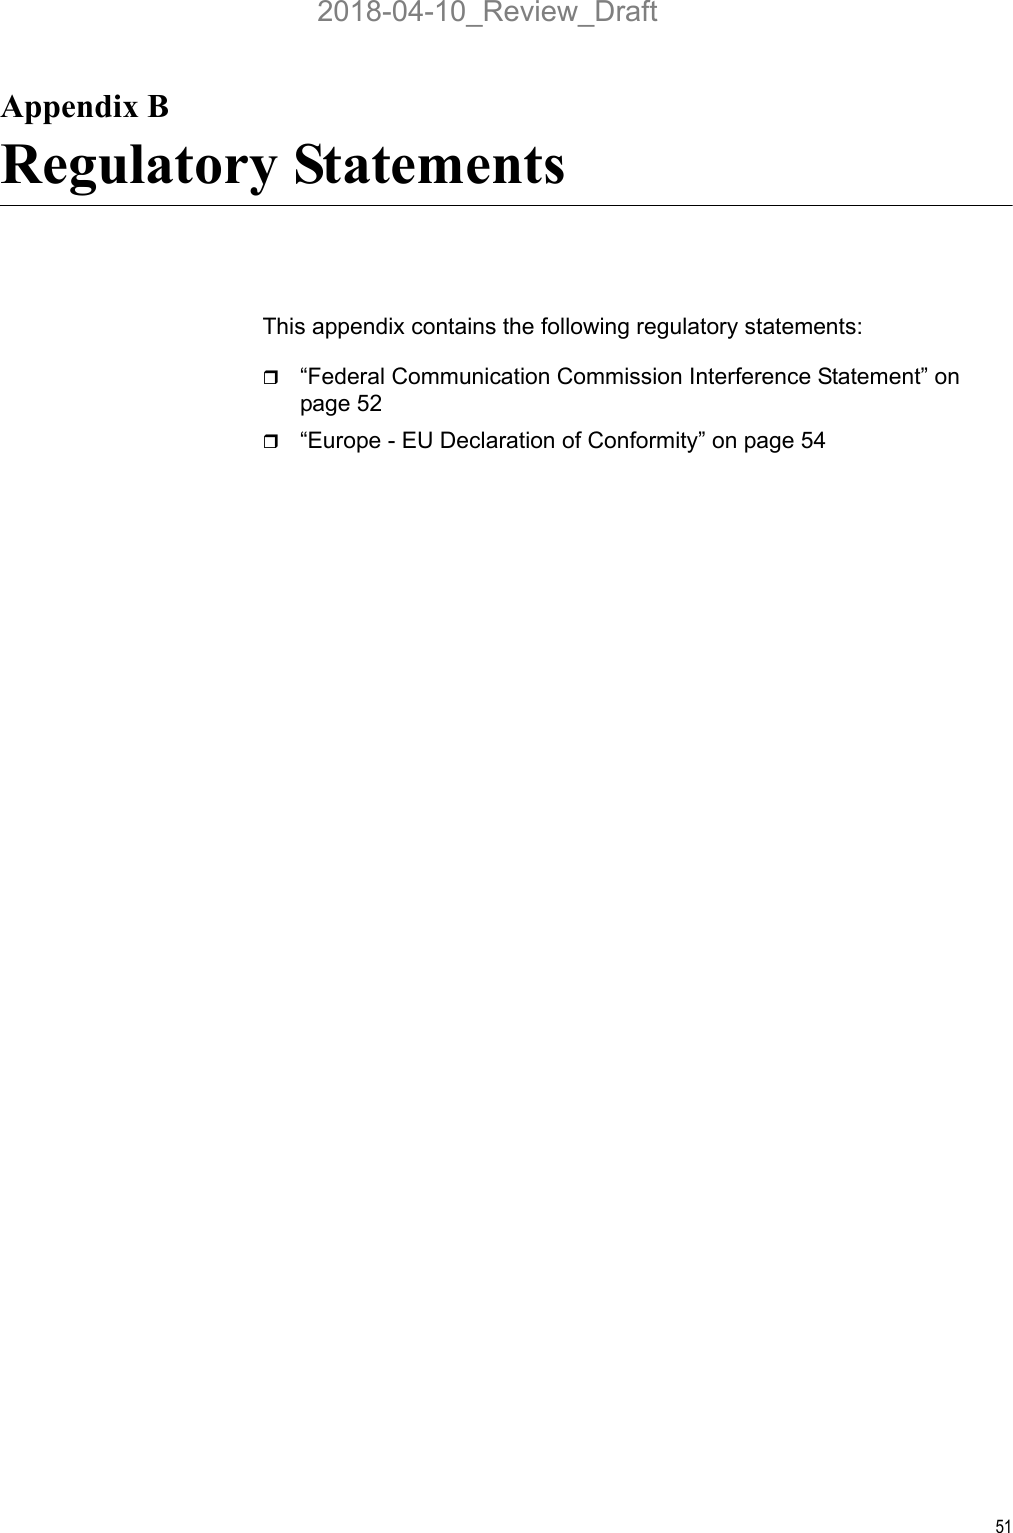 51Appendix BRegulatory StatementsThis appendix contains the following regulatory statements:“Federal Communication Commission Interference Statement” on page 52“Europe - EU Declaration of Conformity” on page 542018-04-10_Review_Draft